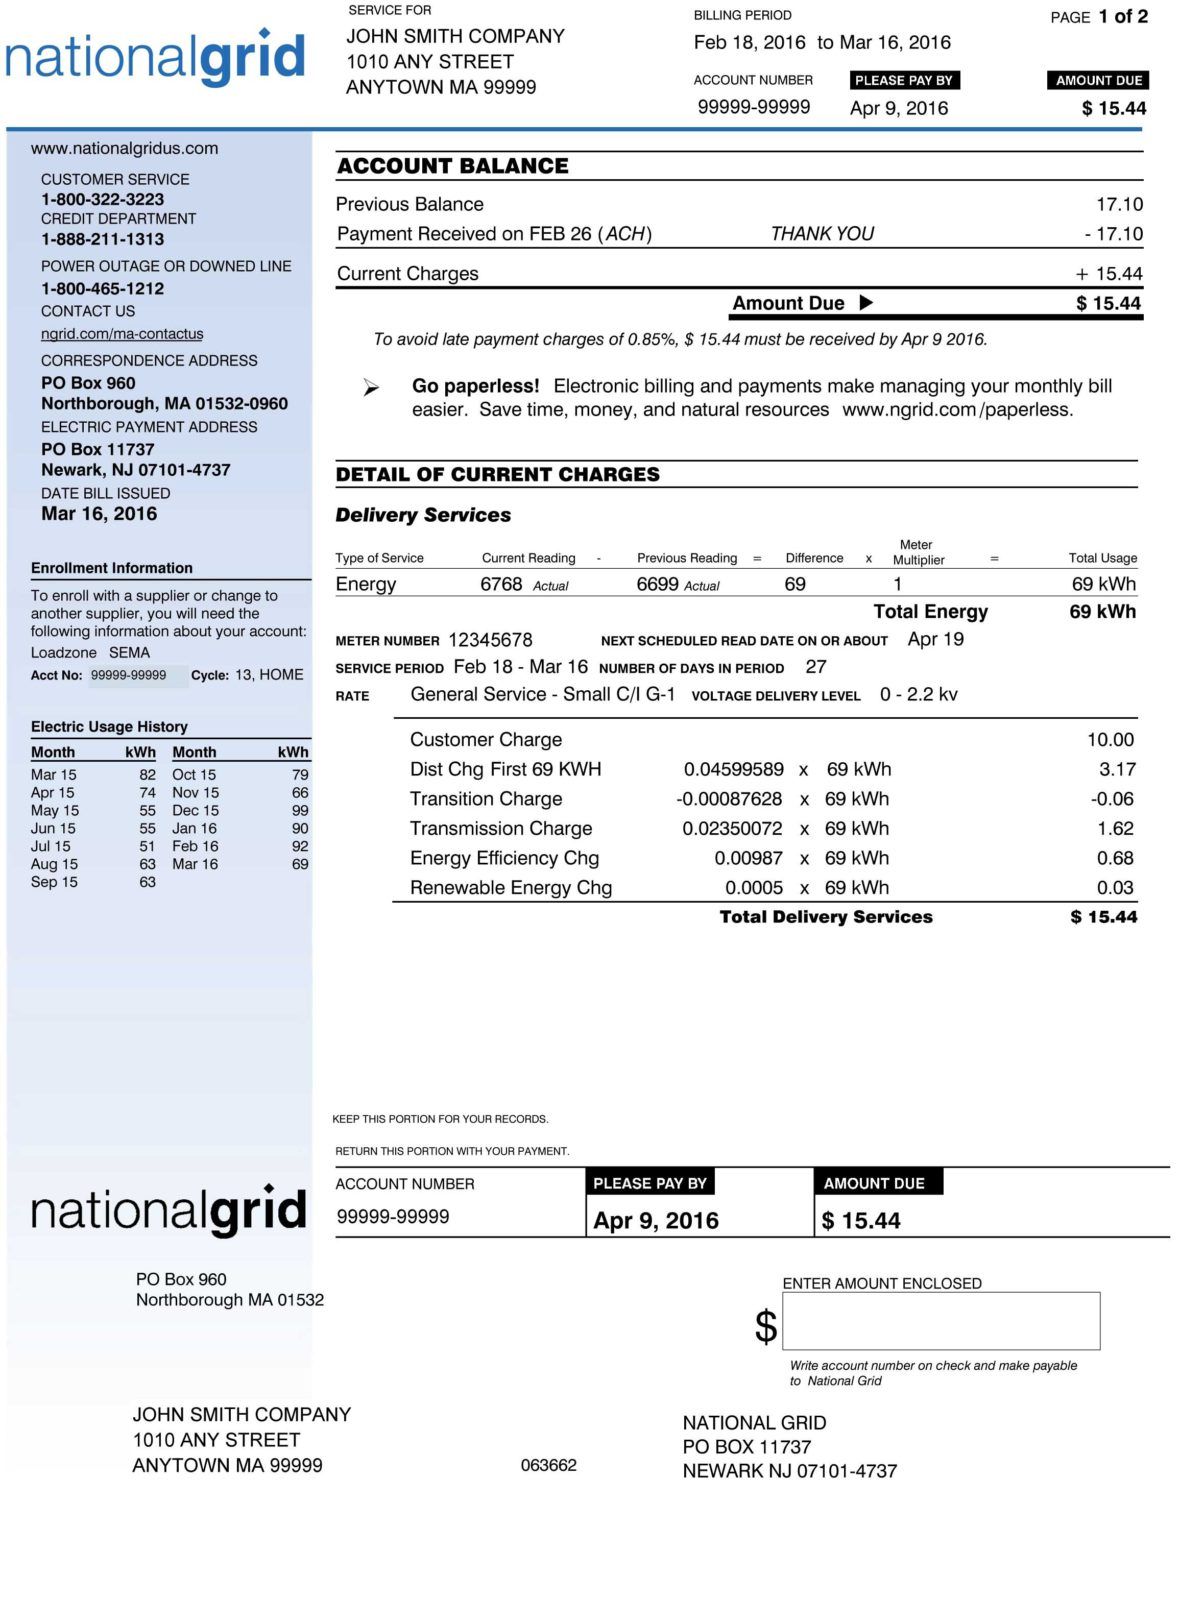 national-grid-bill-electricityrates